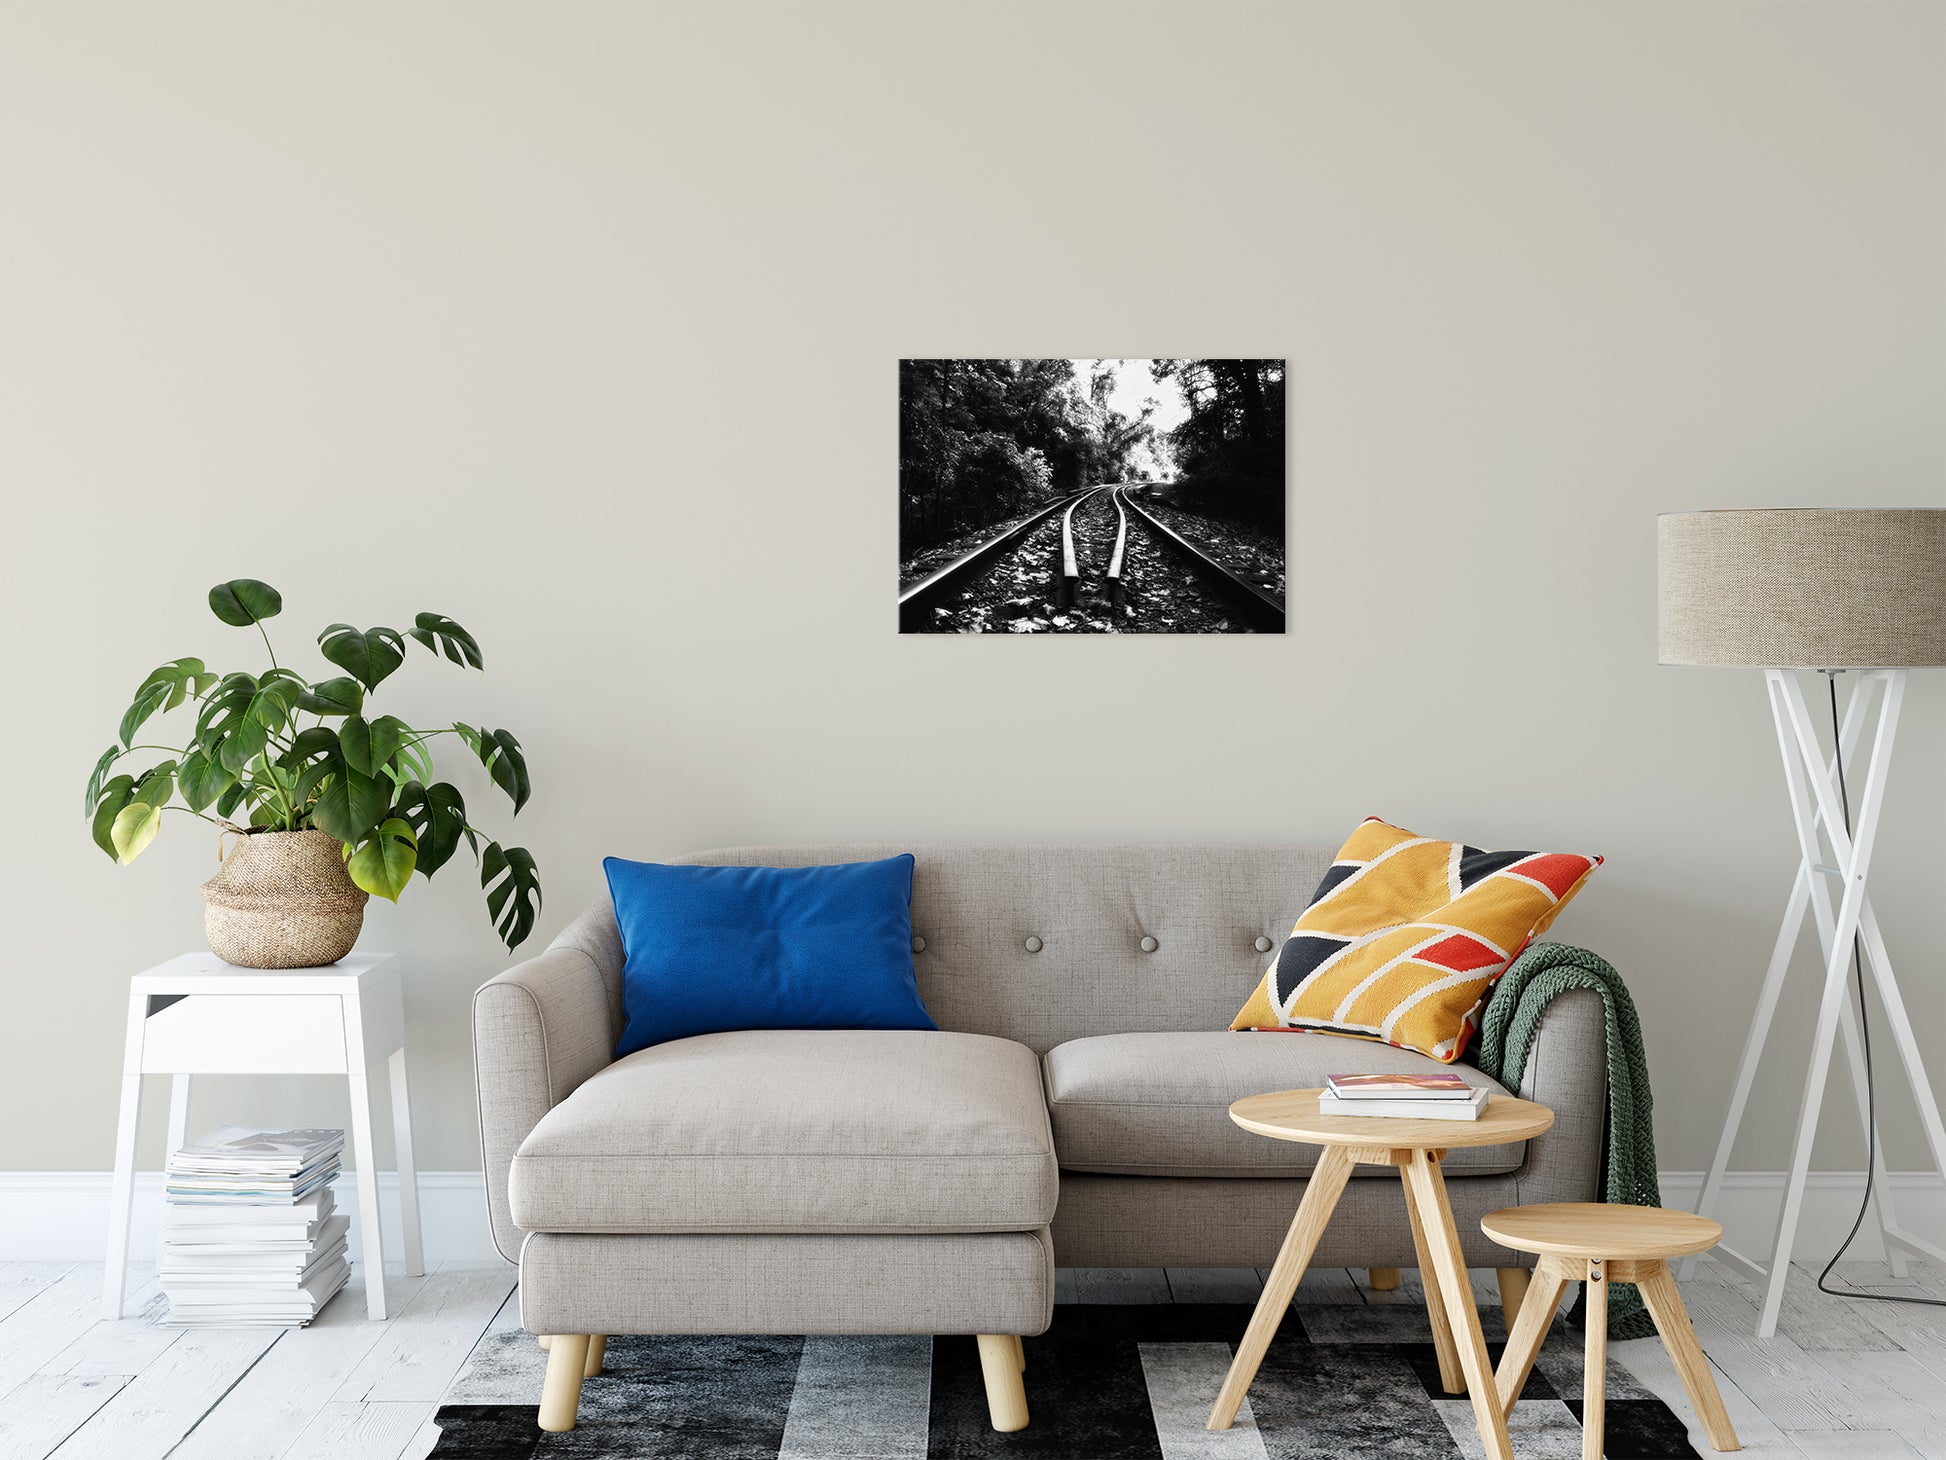 Lead Me Into The Light in Black and White Rural Landscape Fine Art Canvas Wall Art Prints 20" x 30" - PIPAFINEART